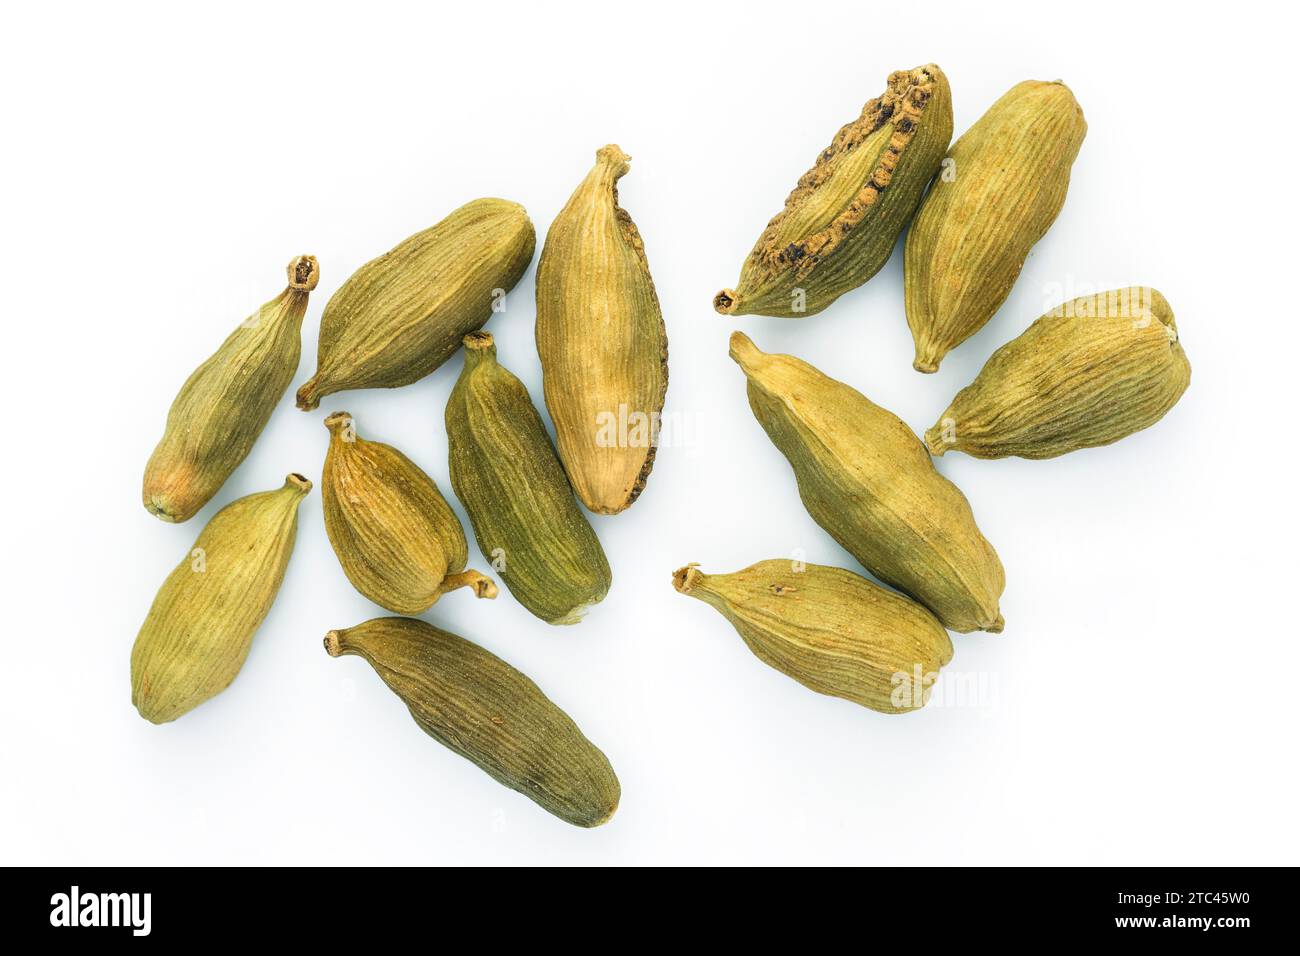 Top view of whole green cardamom pods on white background Stock Photo